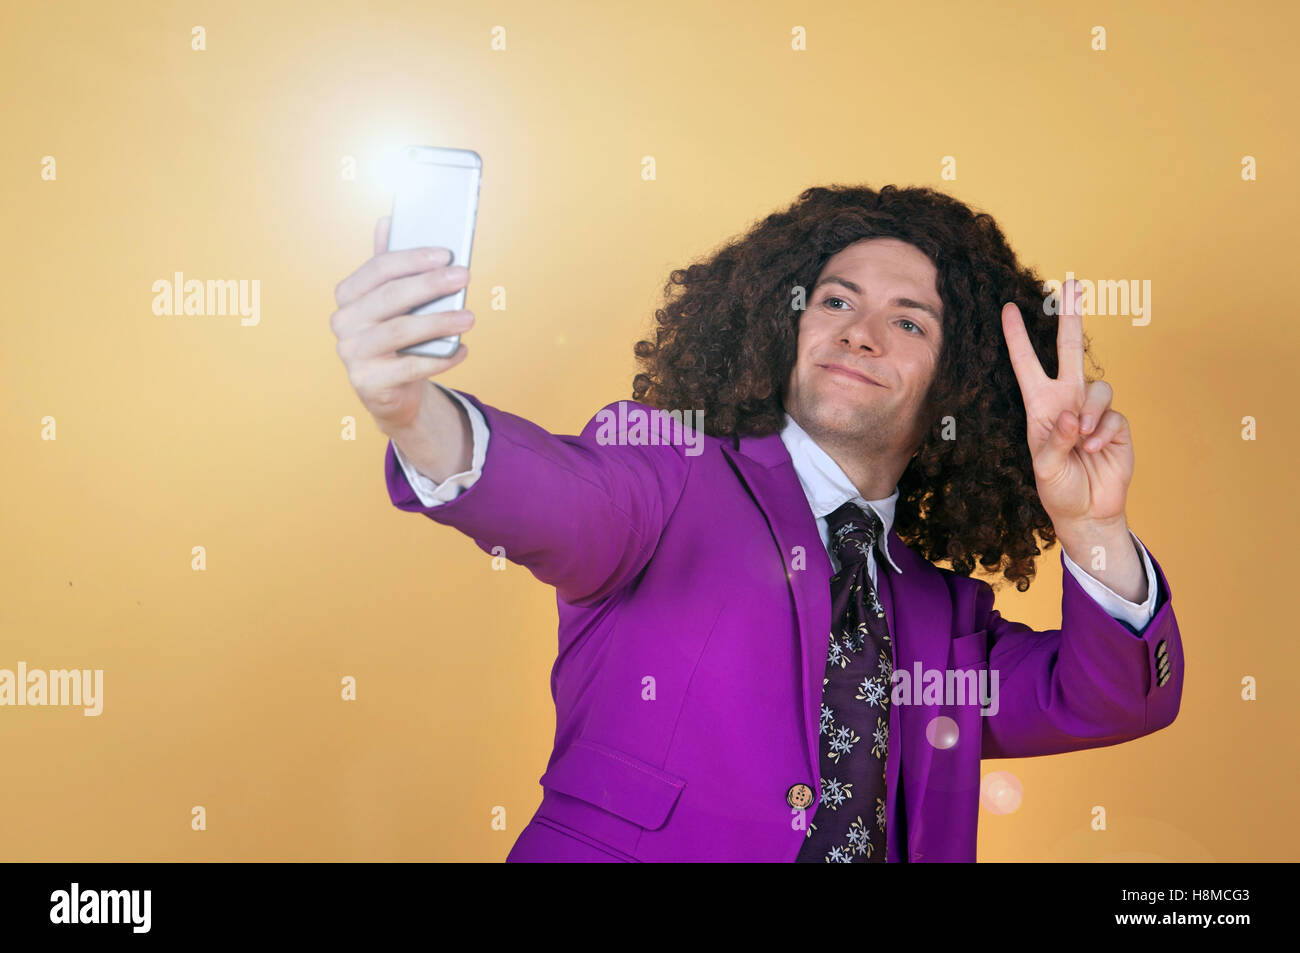 Caucasian man with afro wearing Purple Suit taking a selfie Stock Photo